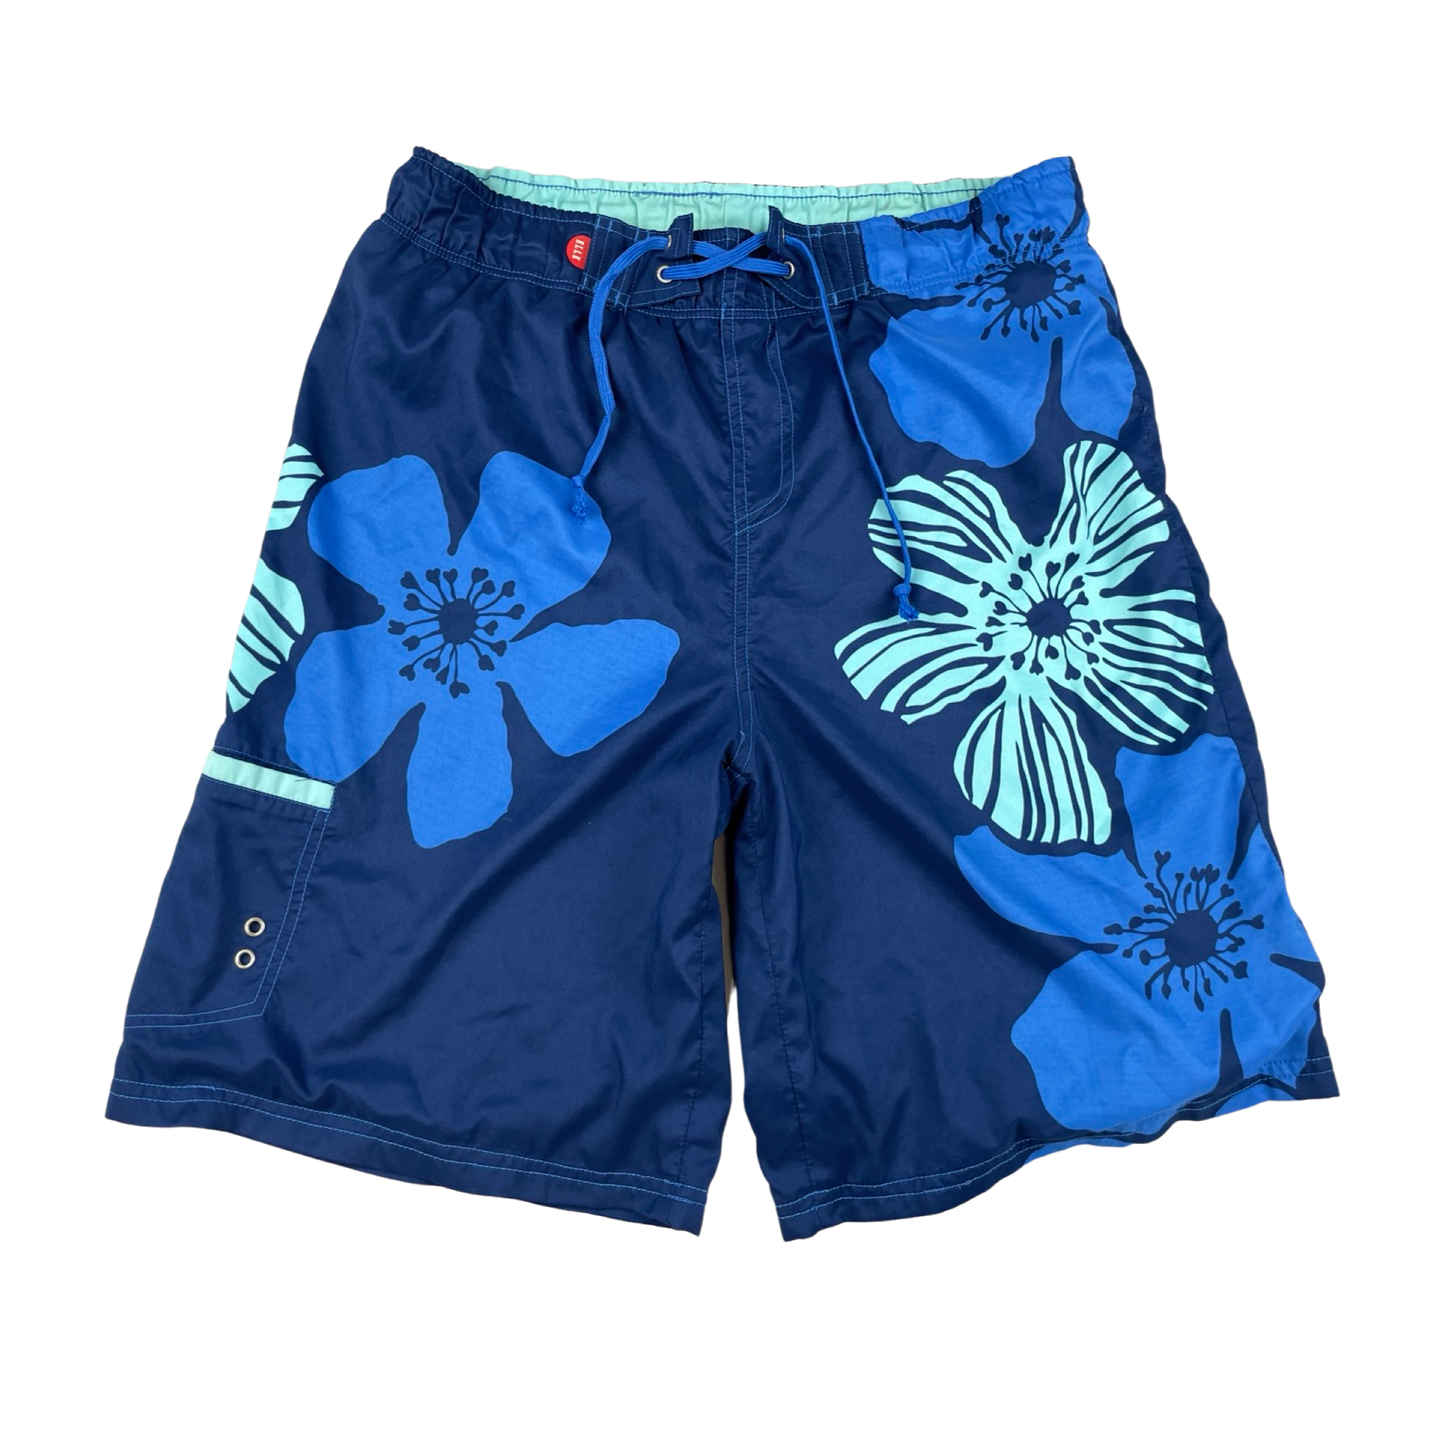 Vintage Hawaiian Surf Style Blue Floral Swimming Trunks L